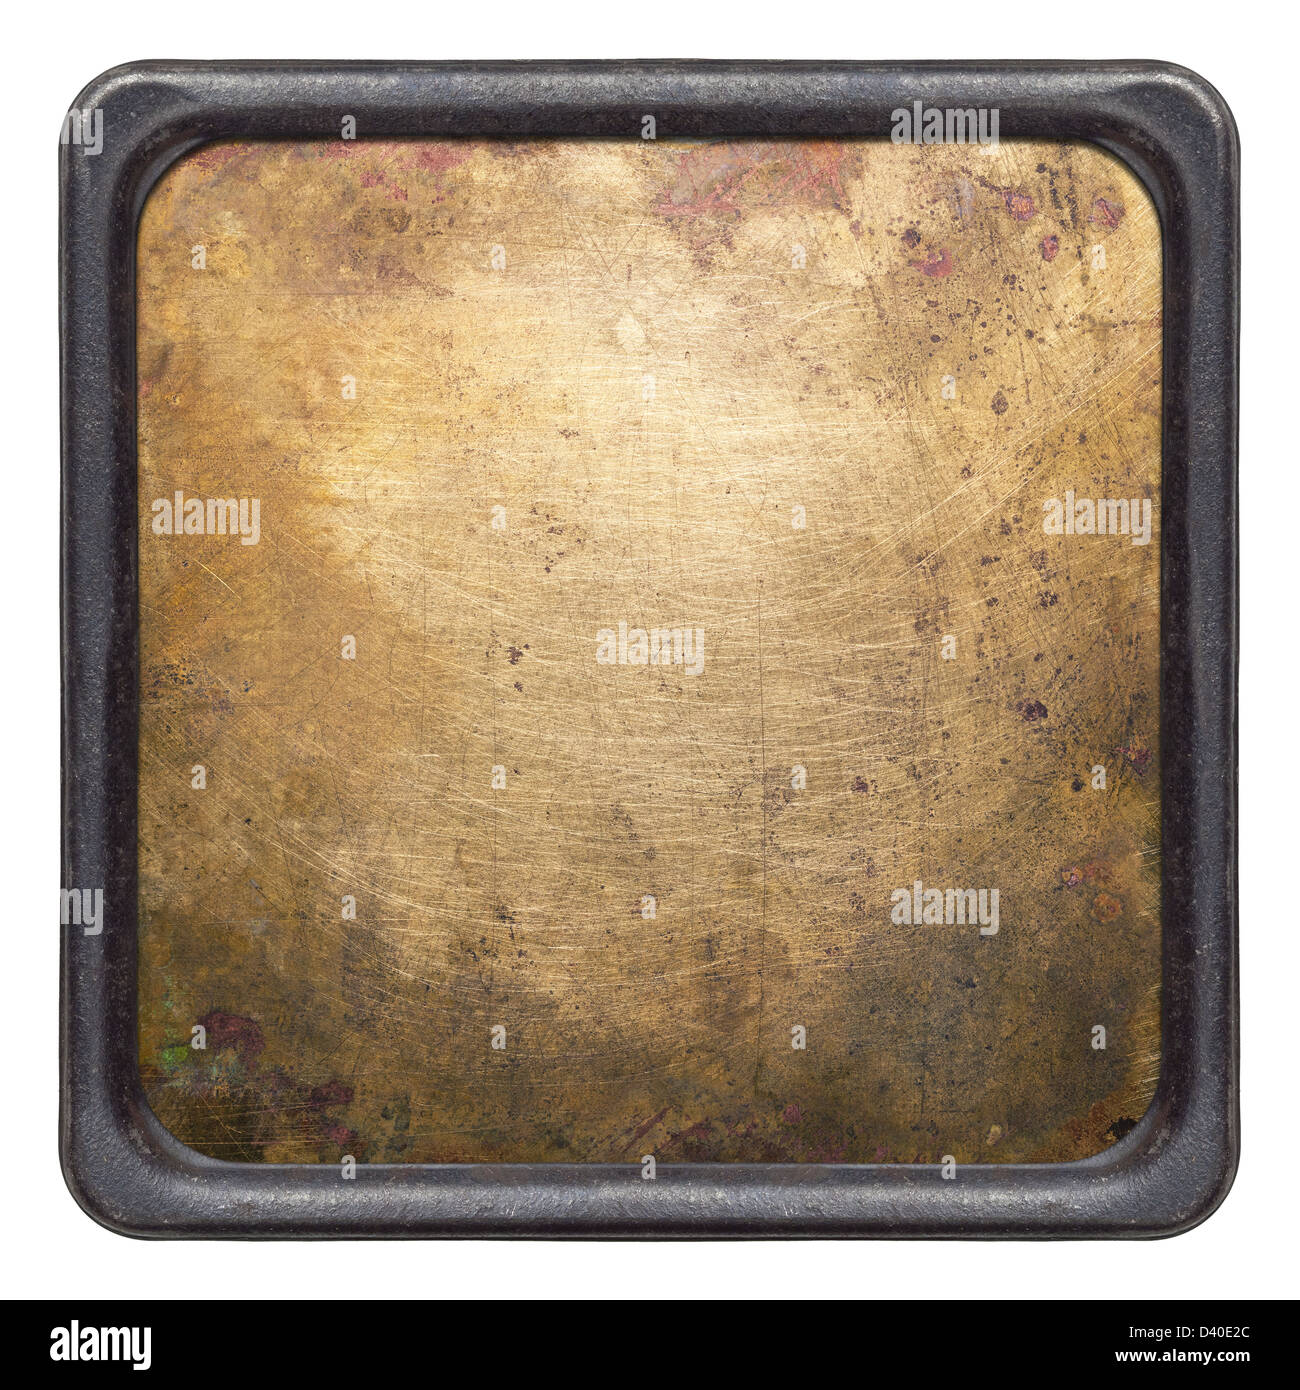 Old Brass Plate Texture Background Stock Photo, Picture and